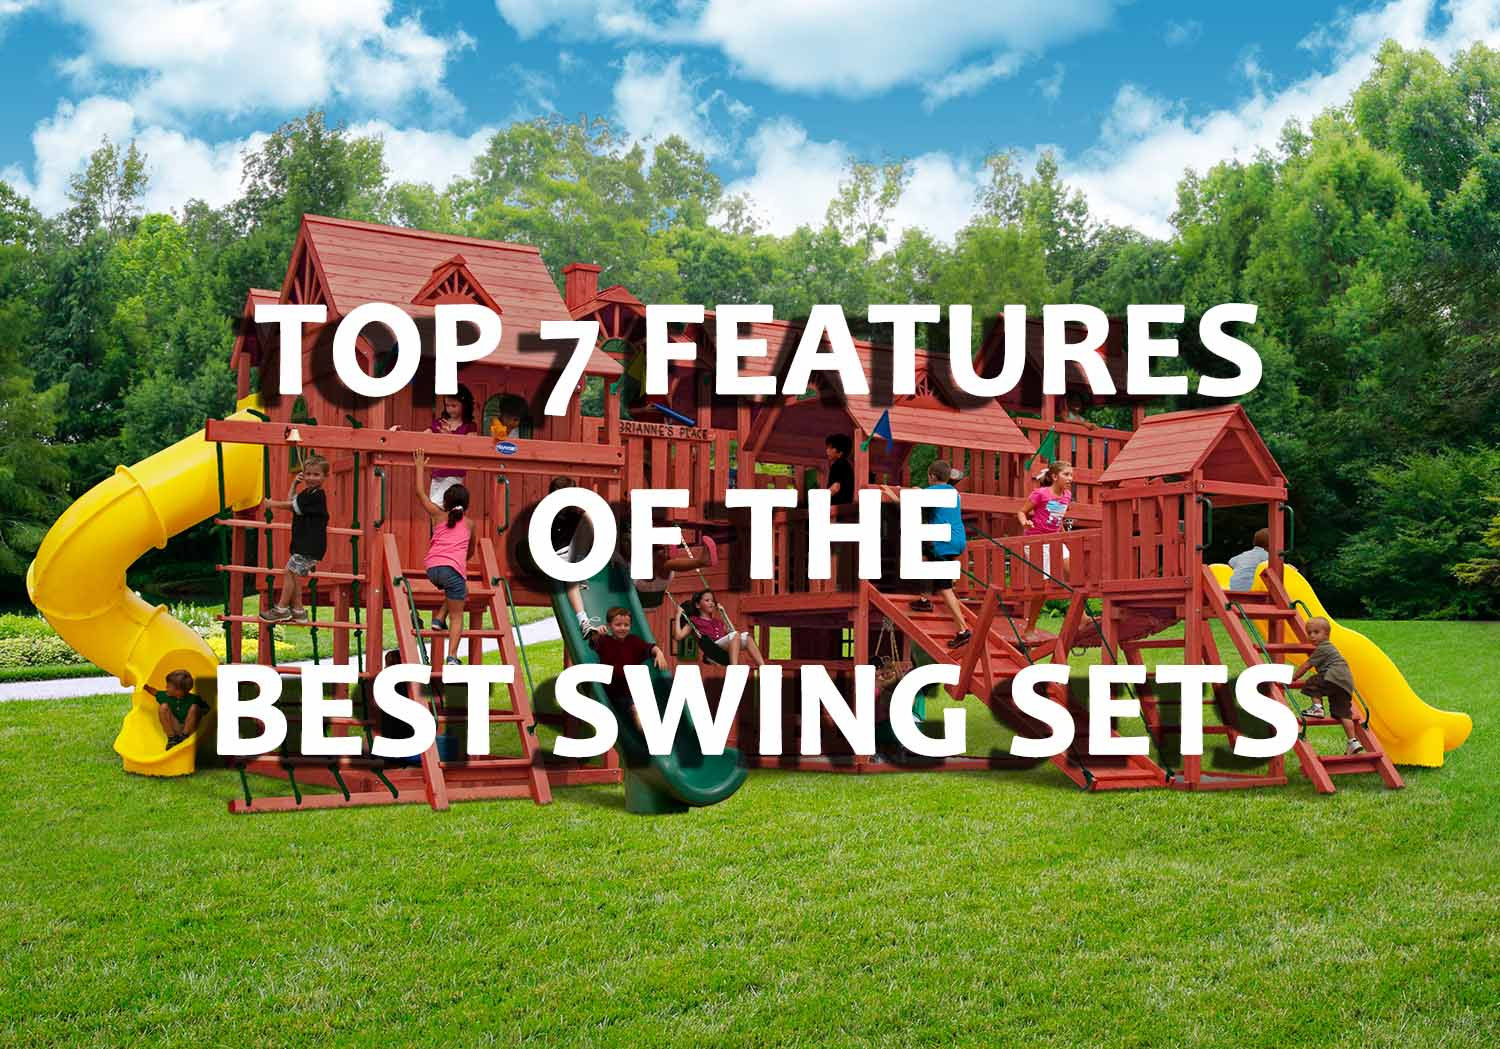 The Top 7 Features of the BEST Swing Sets